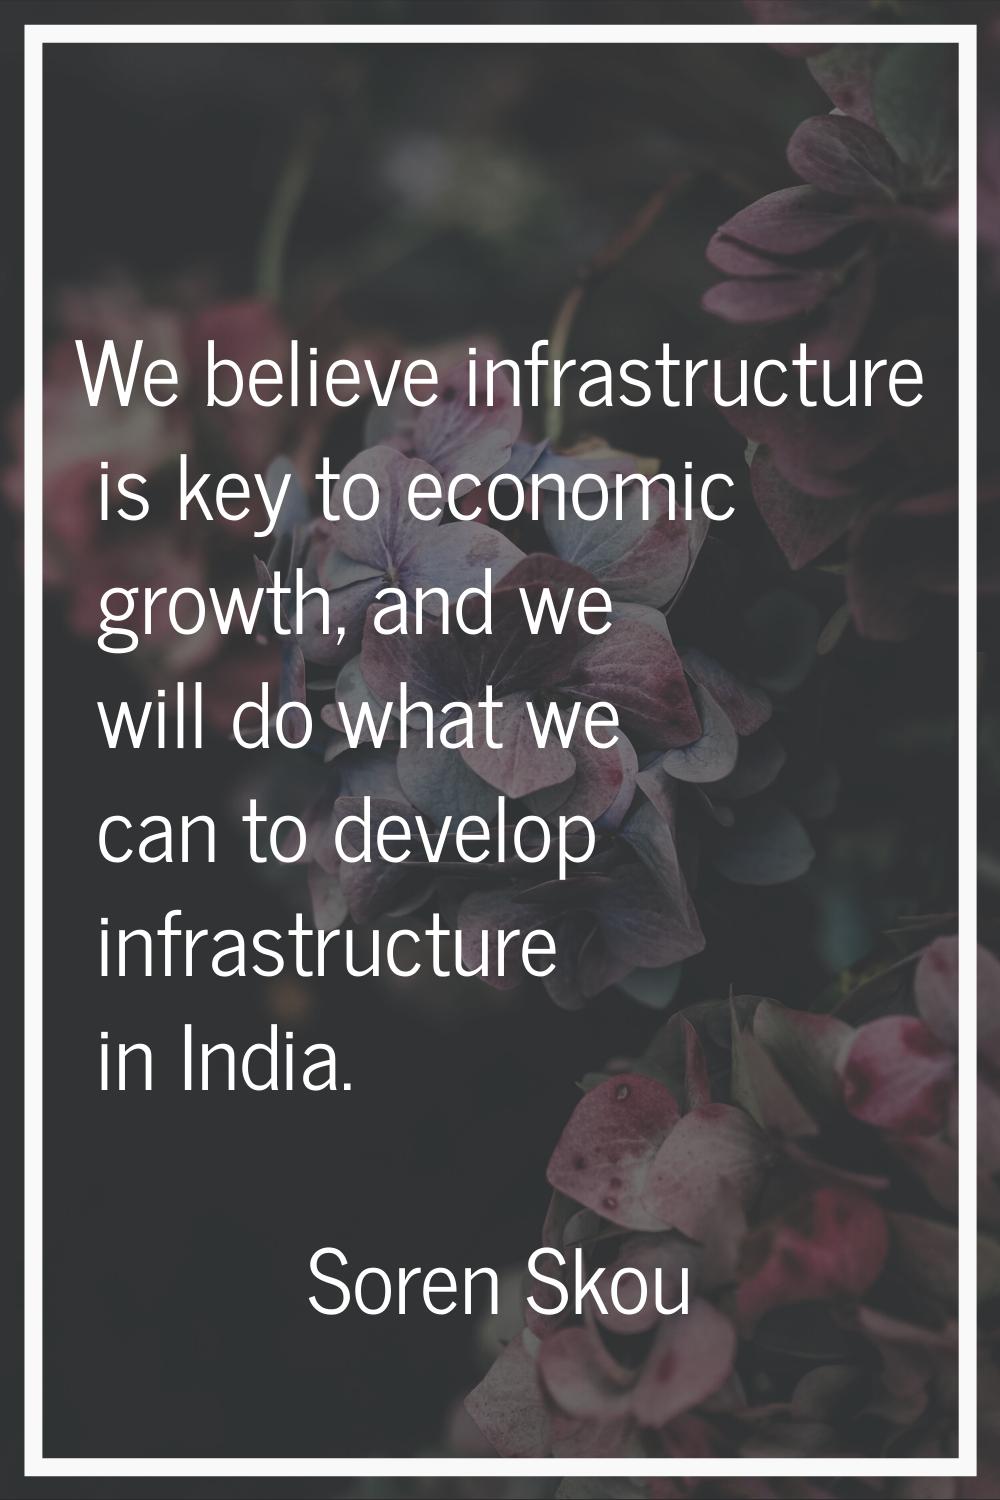 We believe infrastructure is key to economic growth, and we will do what we can to develop infrastr